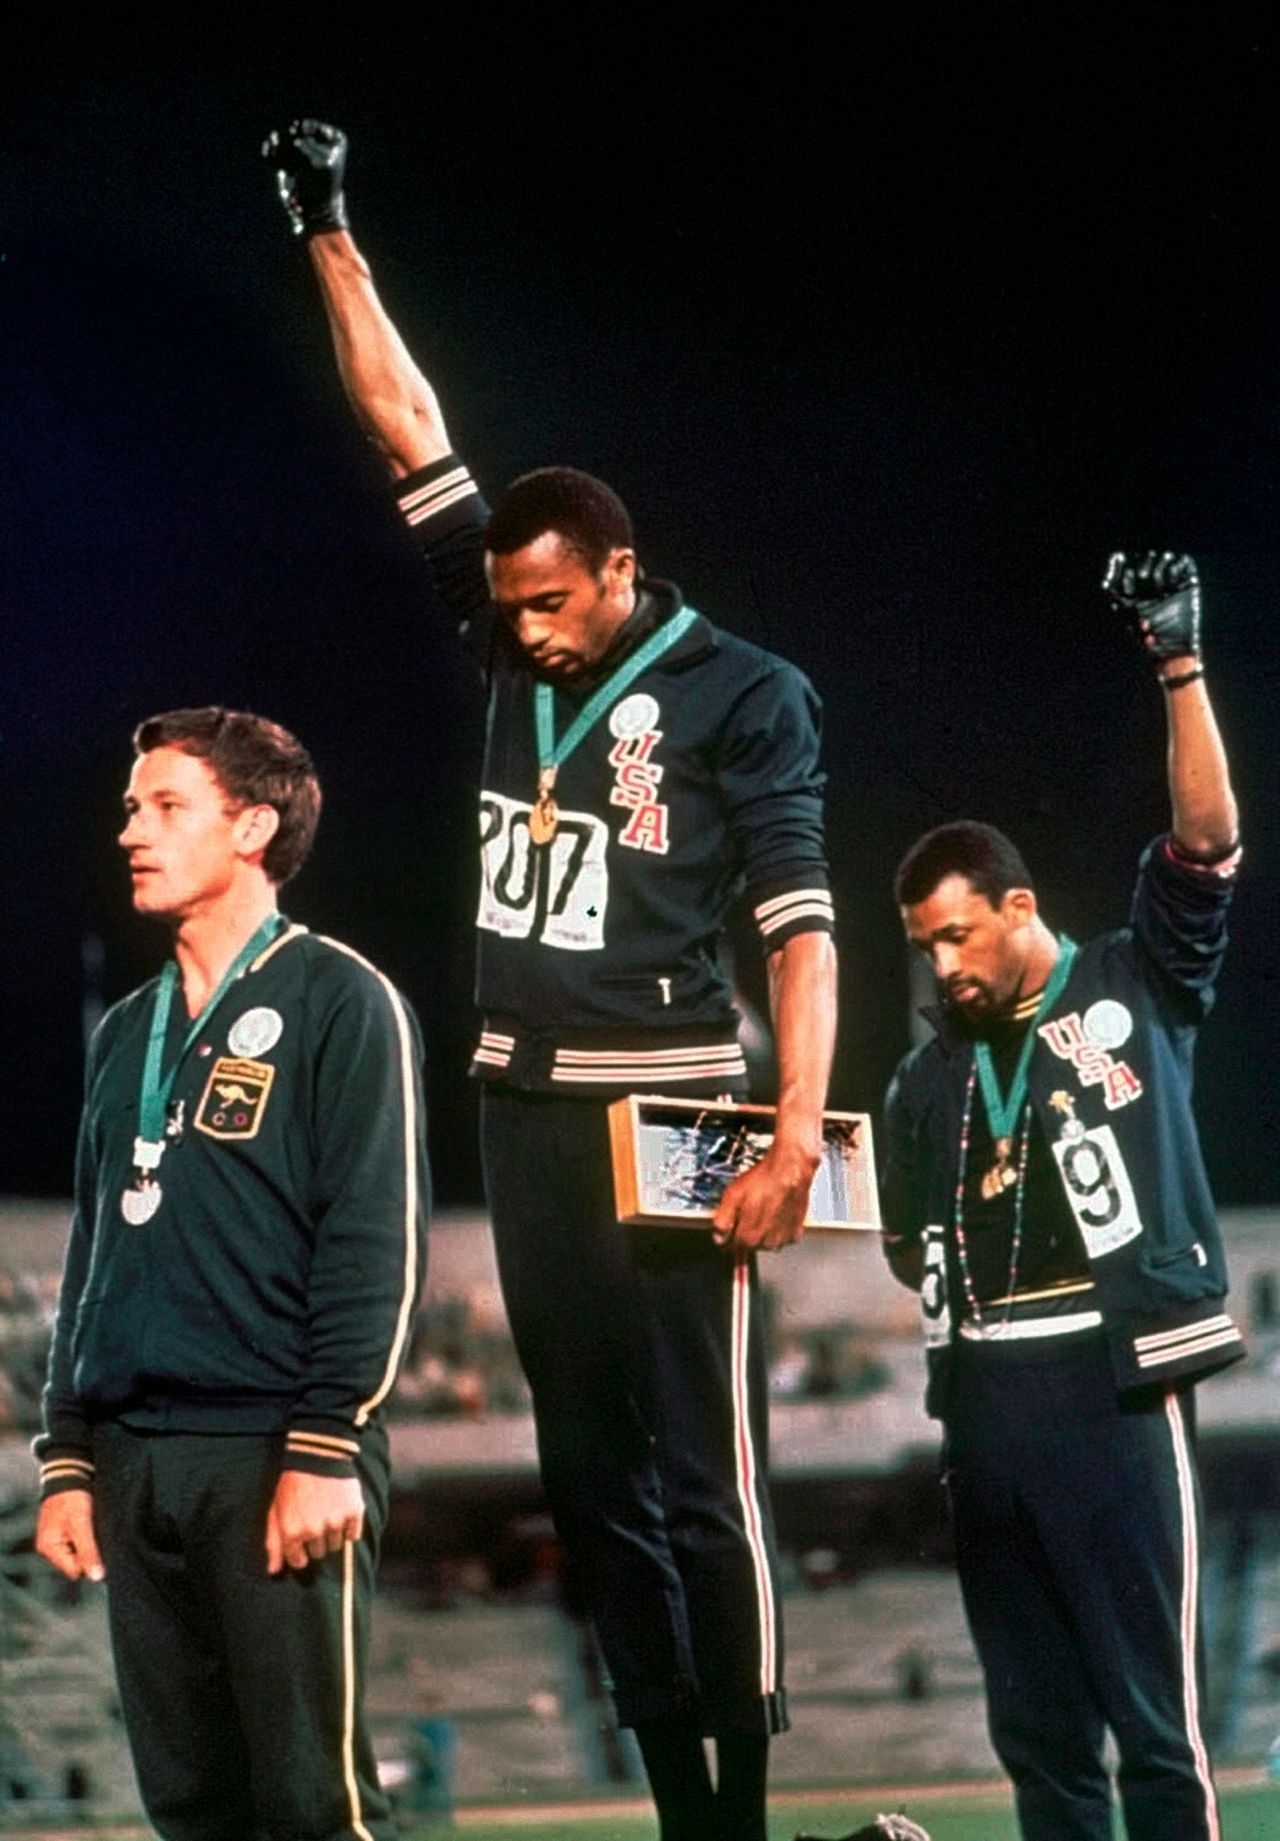 American athletes Tommie Smith, center, and John Carlos raise their fists and hang their heads while the US National Anthem plays during their medal ceremony at the 1968 Summer Games in Mexico City. Their gesture became front-page news around the world as a symbol of the struggle for civil rights. To their left stood Australian Peter Norman, who expressed his support by wearing an Olympic Project for Human Rights badge.